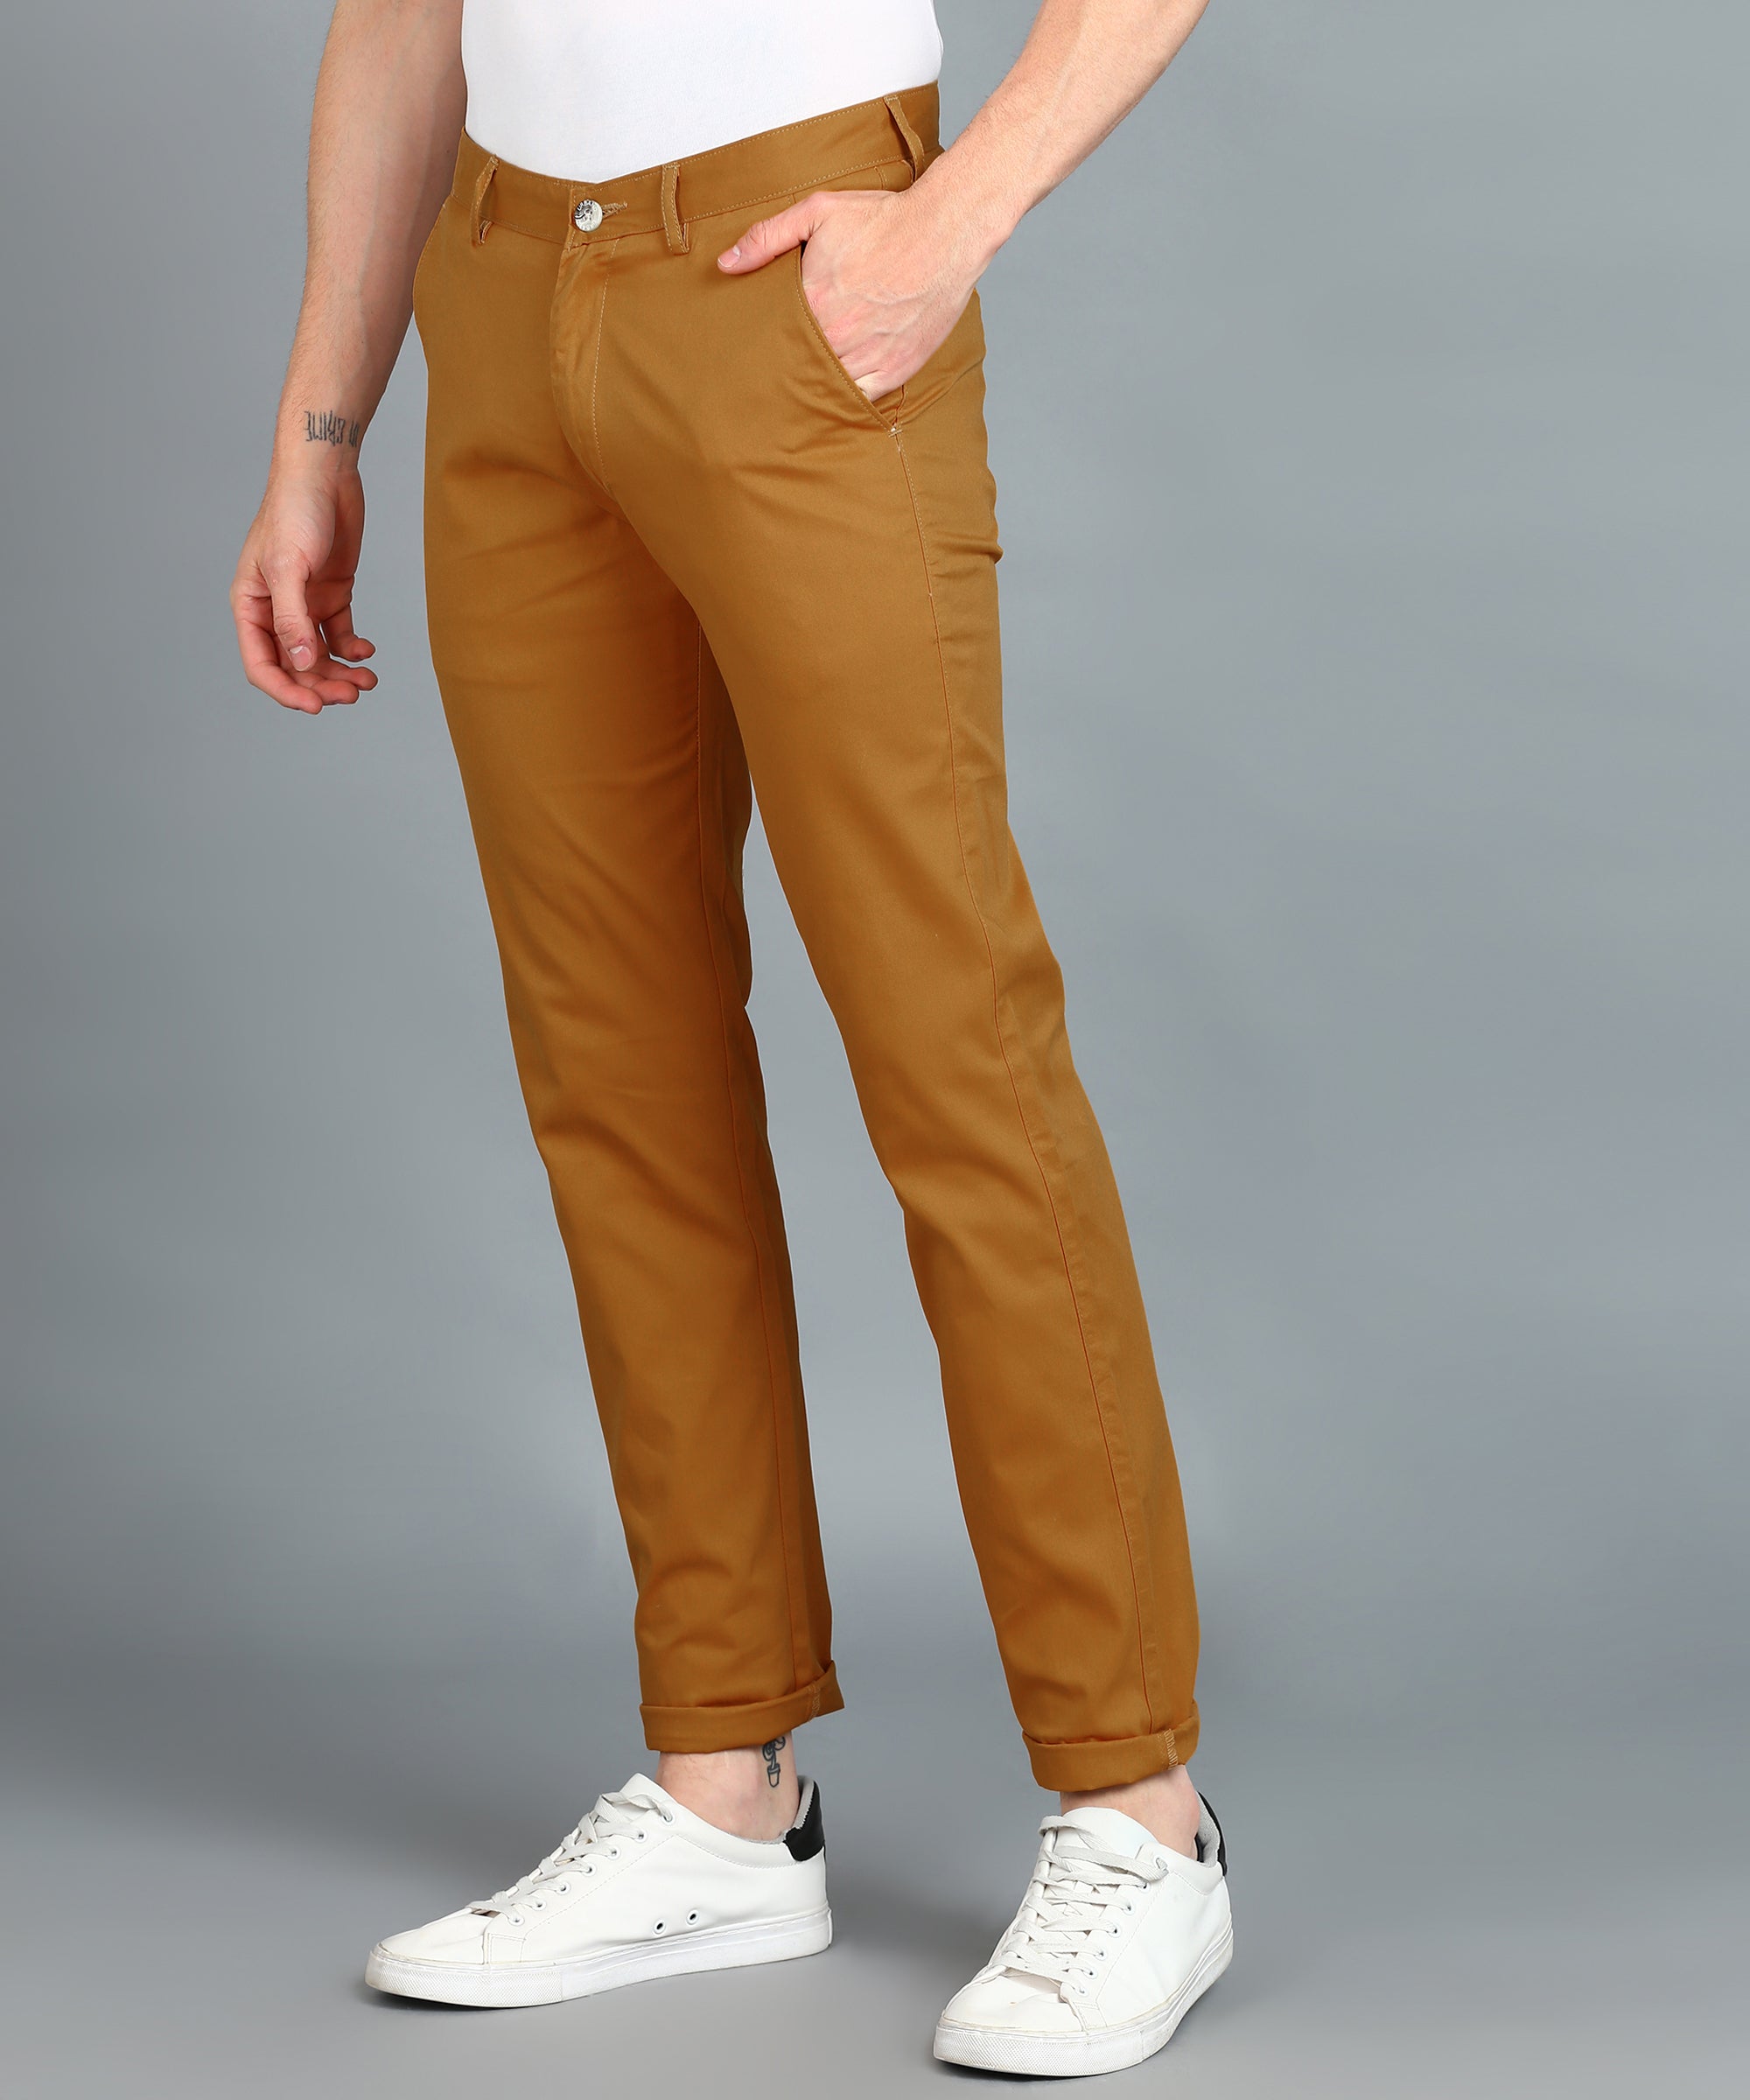 Men's Yellow Cotton Light Weight Non-Stretch Slim Fit Casual Trousers